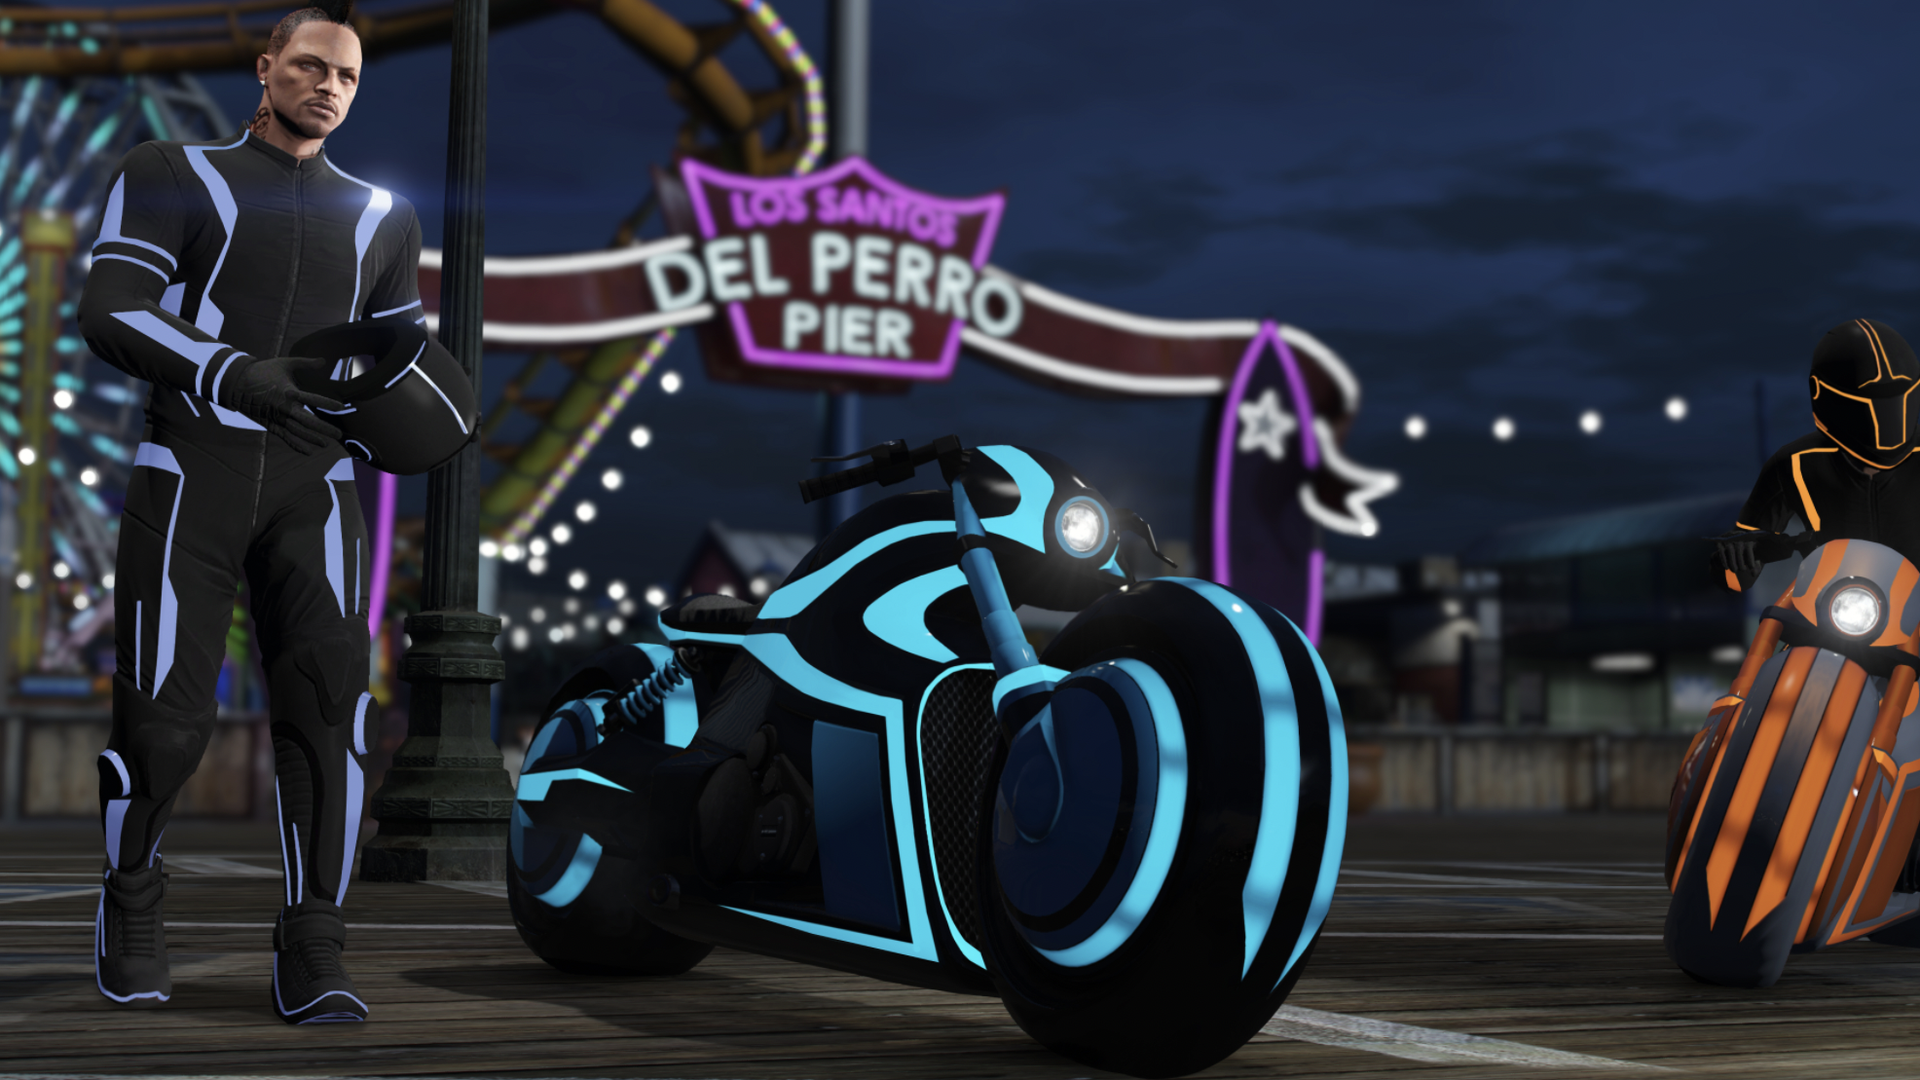 Screenshot of a "Grand Theft Auto" where a character is wearing a black suit with purple neon stripes next to a black motorcycle with light blue neon stripes 